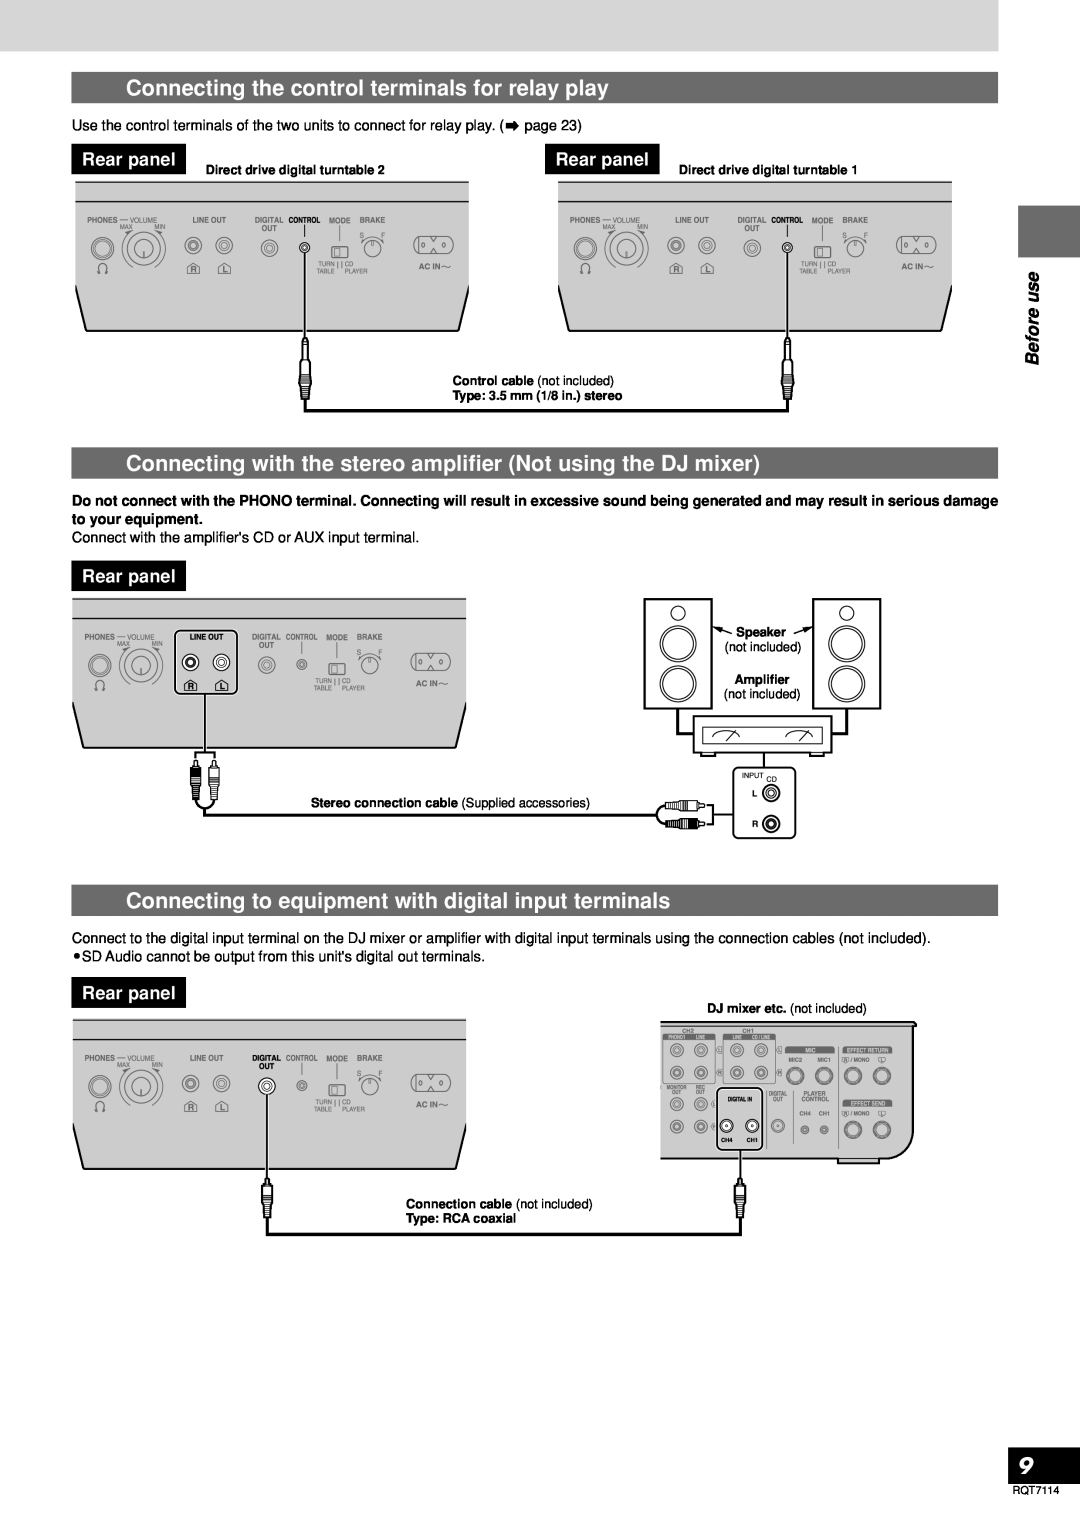 Panasonic SL-DZ1200 manual Connecting the control terminals for relay play 